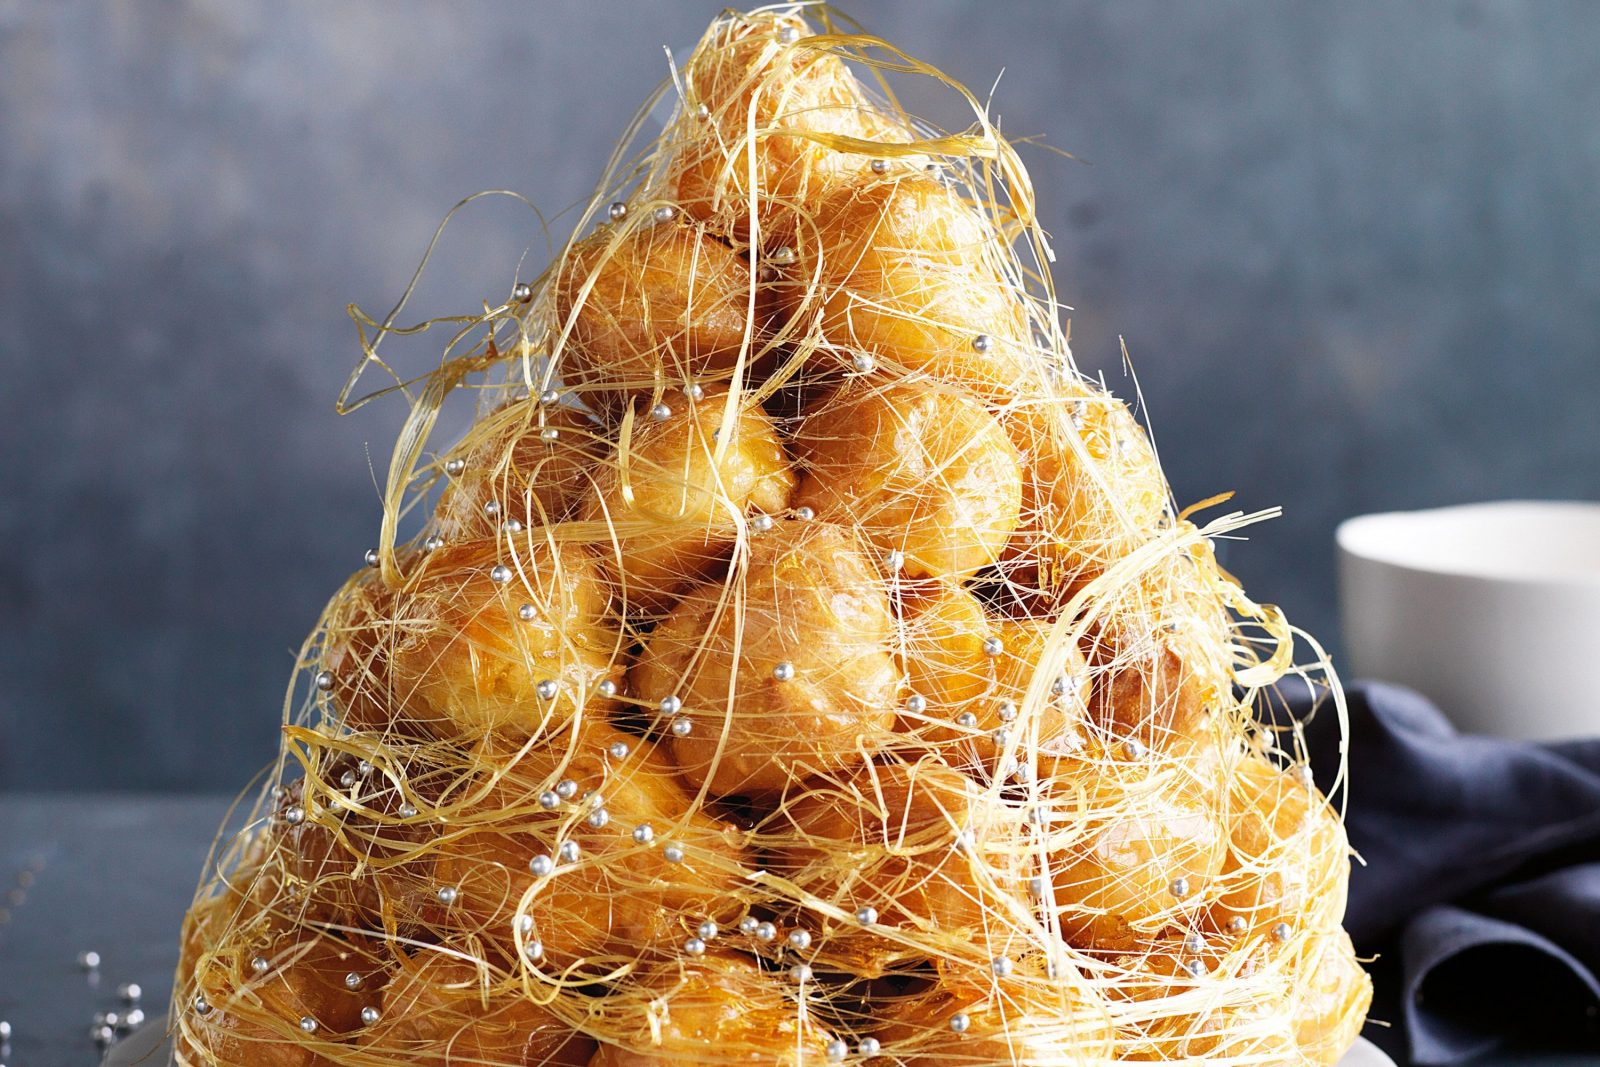 🥖 How Many Baked Goods Have You Tried from Around the World? Croquembouche